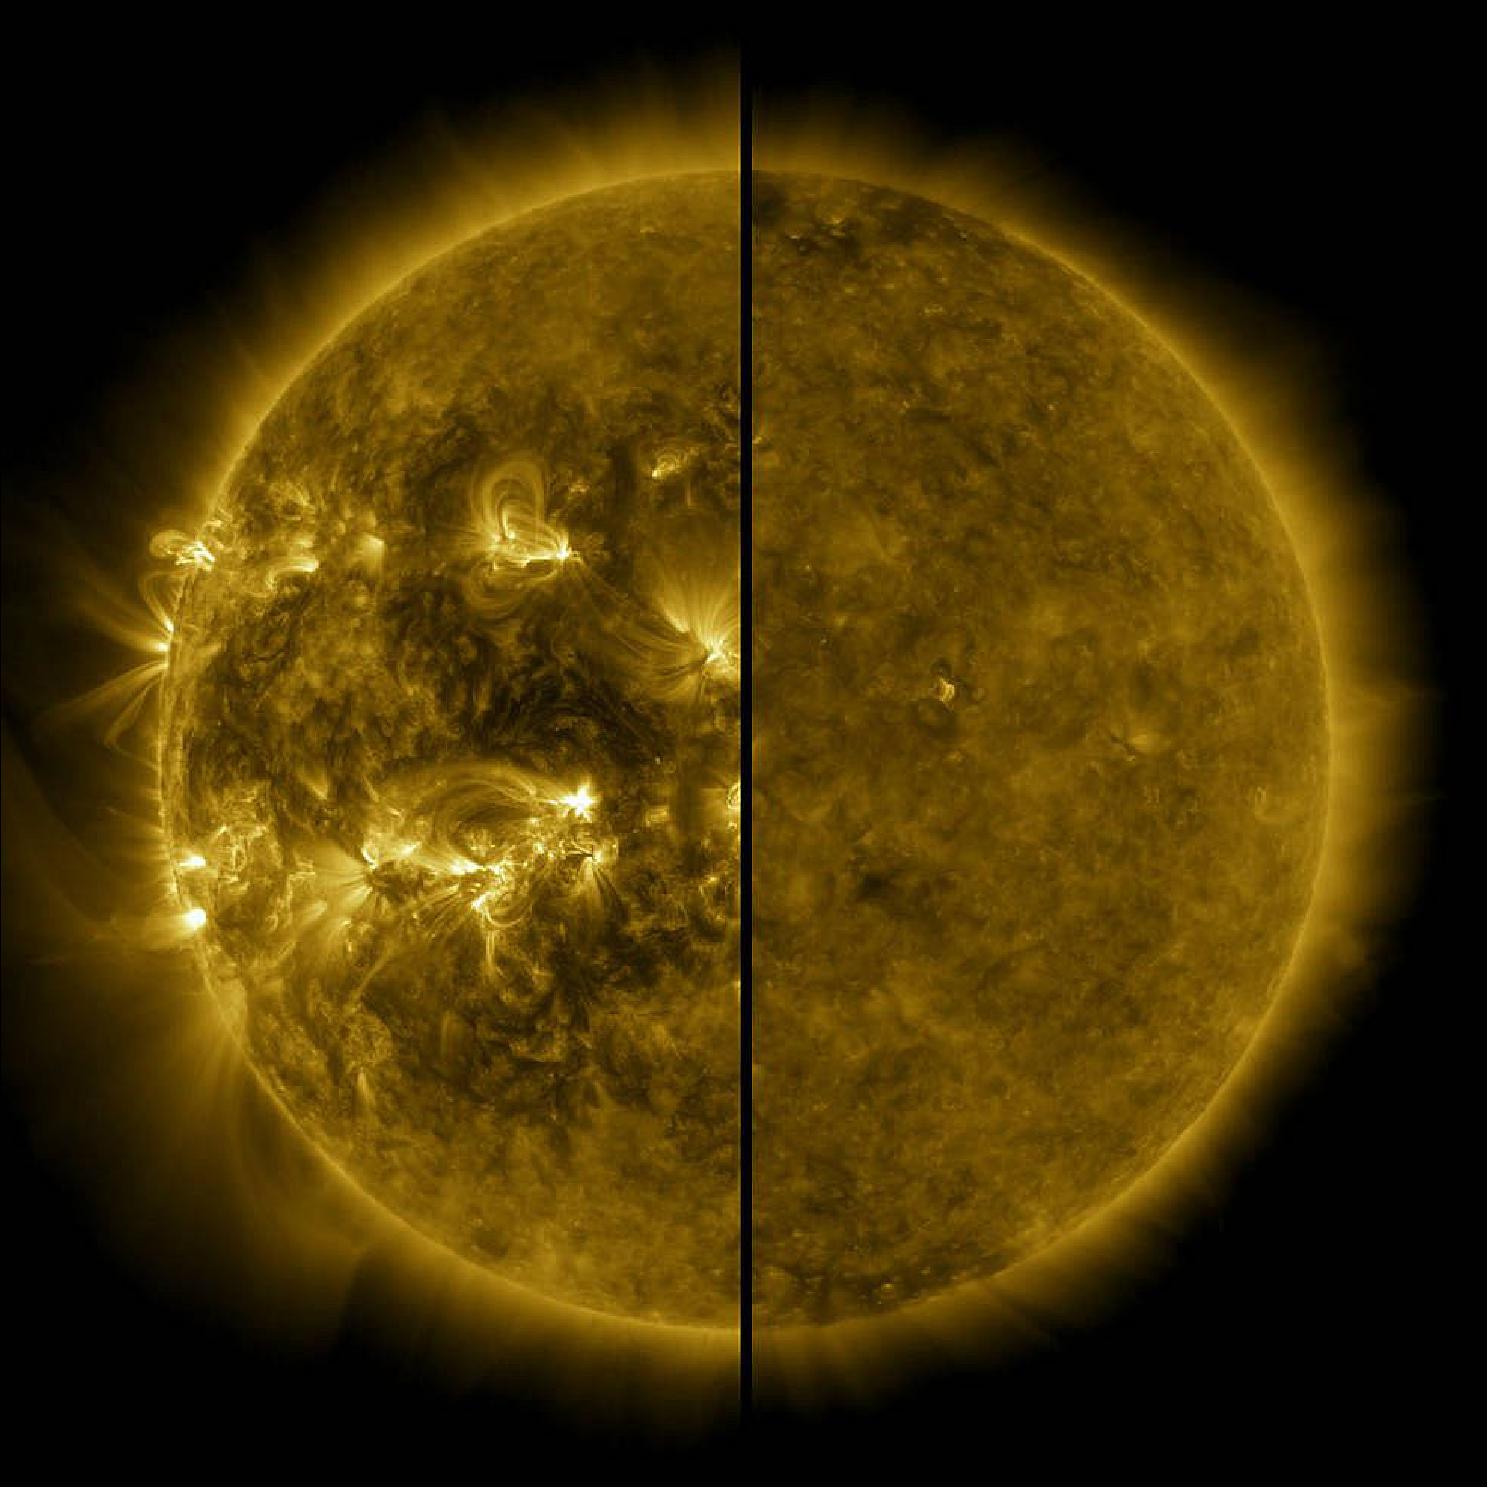 Figure 33: This split image shows the difference between an active Sun during solar maximum (on the left, captured in April 2014) and a quiet Sun during solar minimum (on the right, captured in December 2019). December 2019 marks the beginning of Solar Cycle 25, and the Sun's activity will once again ramp up until solar maximum, predicted for 2025 (image credit: NASA/SDO)